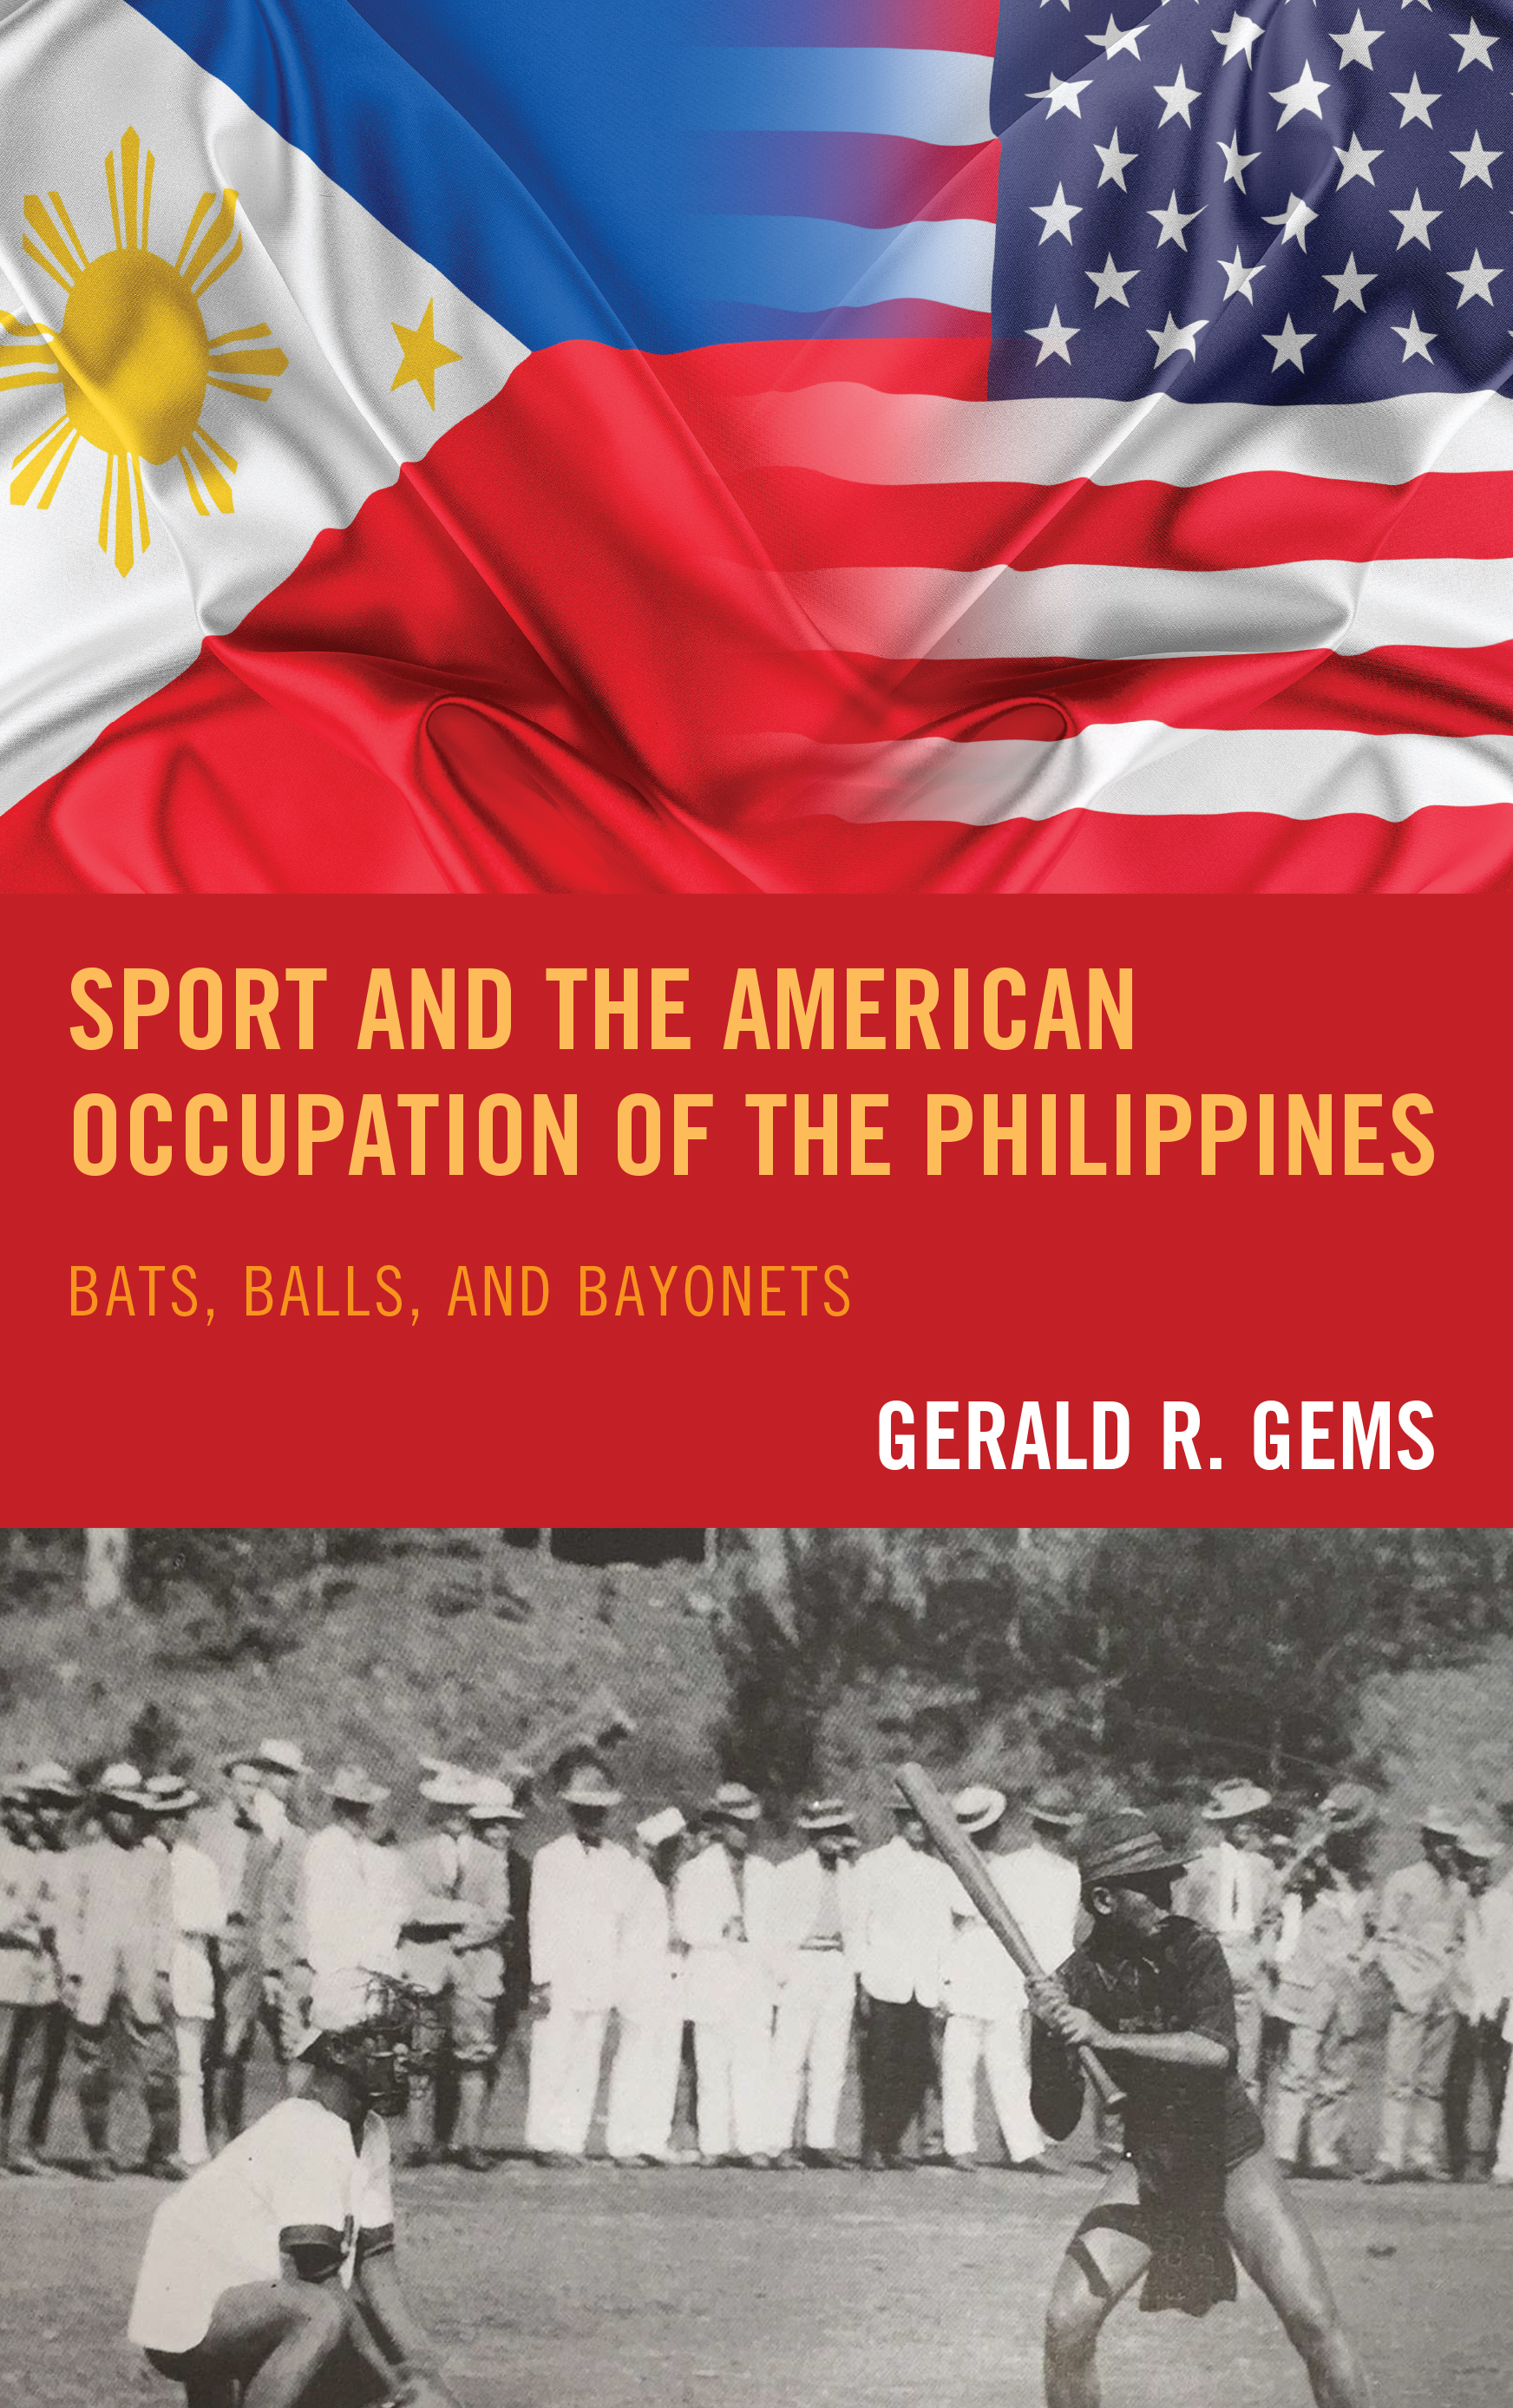 Sport and the American Occupation of the Philippines